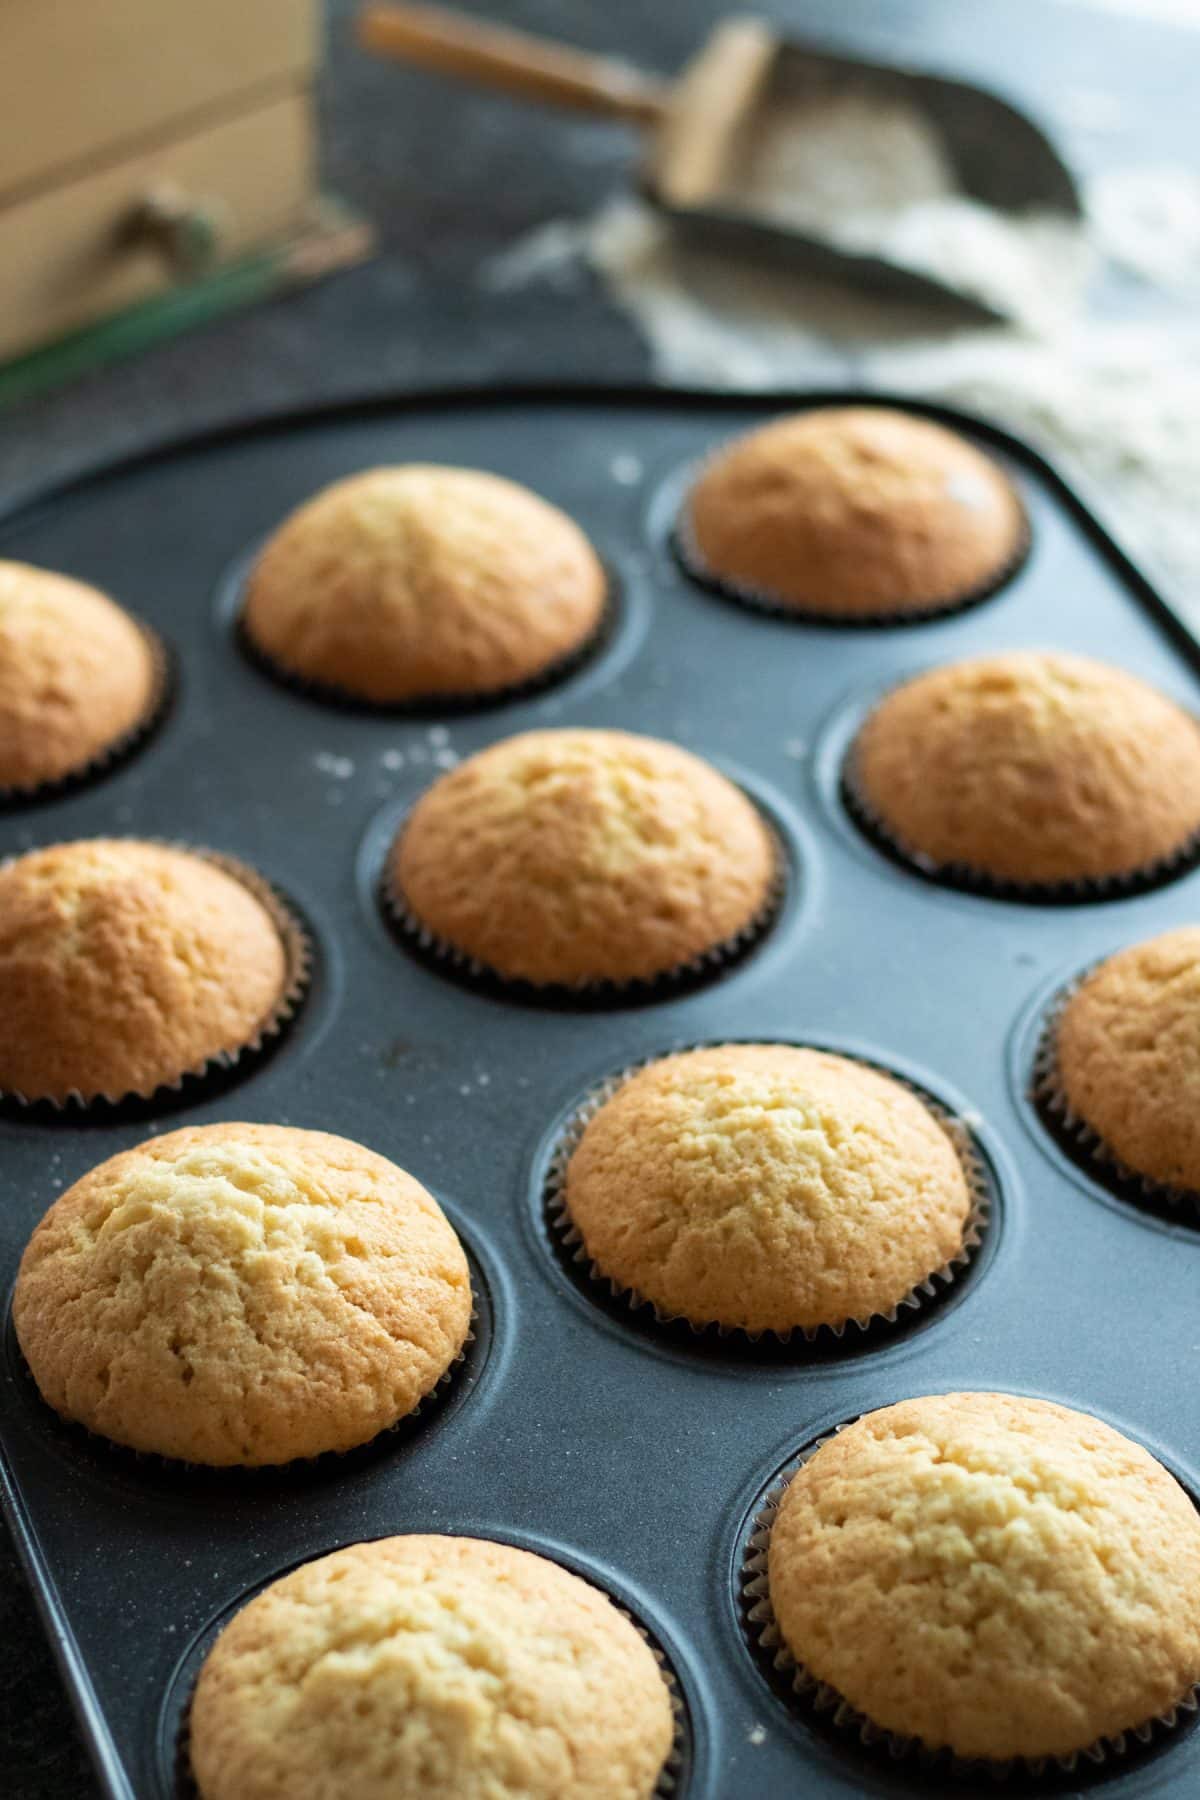 Easy Vanilla Muffins - Perfect For Cupcakes! - always use butter